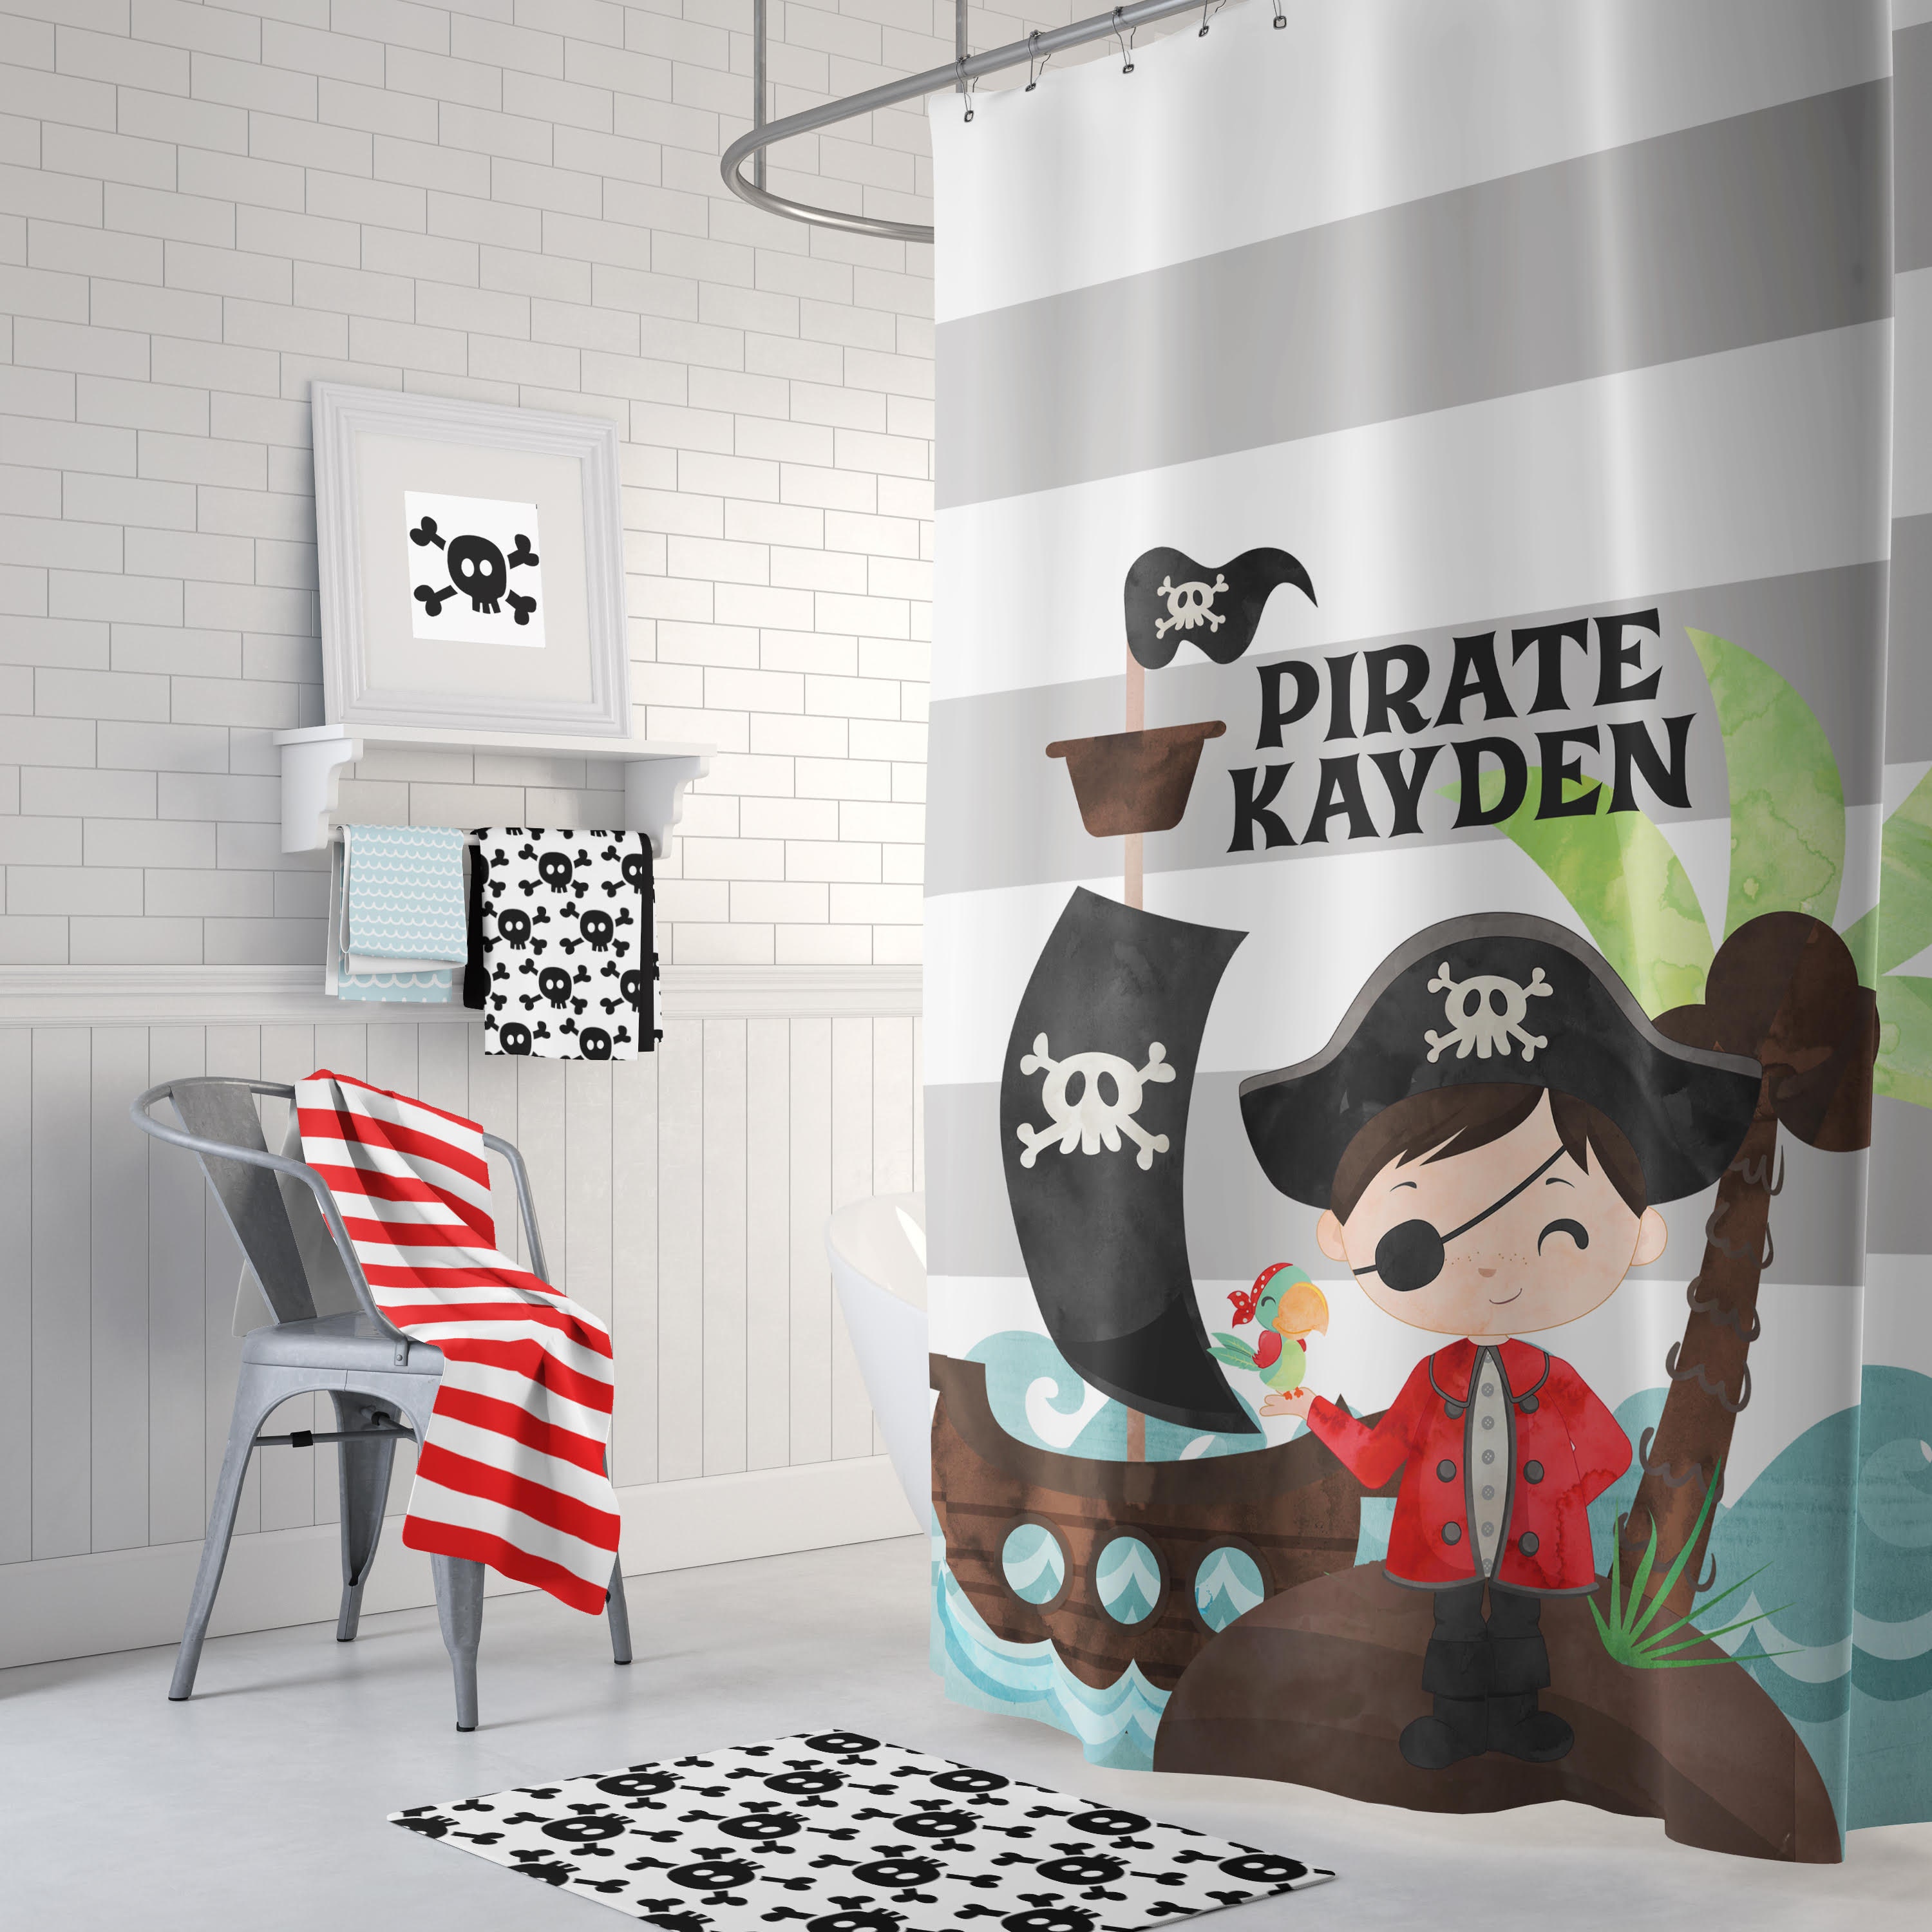 Complete Pirate Bathroom Collection Customized Pirate | Etsy